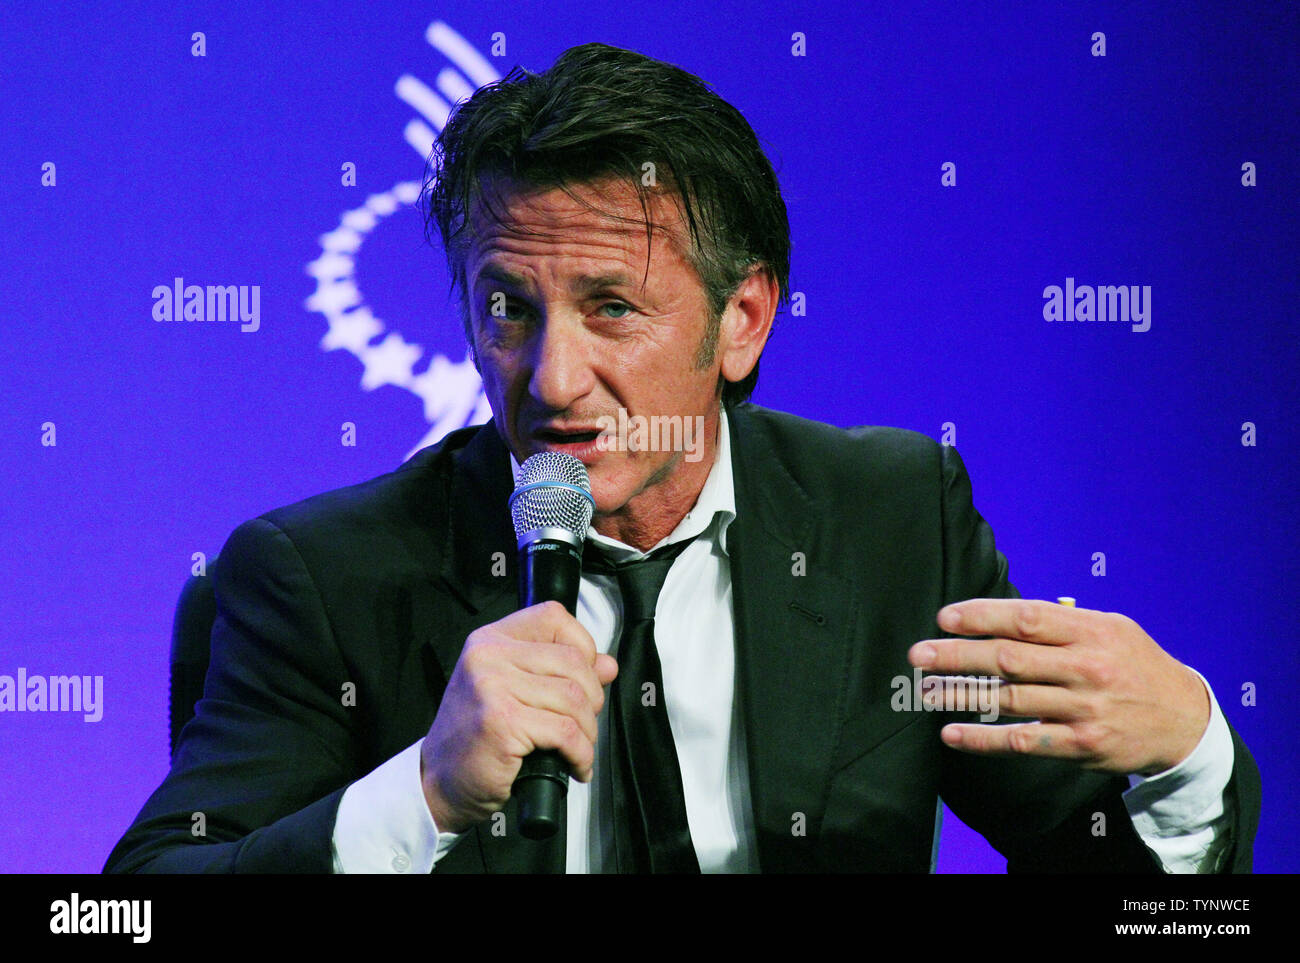 Sean Penn, Ambassador-at-Large for the Republic of Haiti and founder of  J/P Haitian Relief Organization, speaks at the 2013 Clinton Global Initiative Annual Meeting held at the Sheraton Hotel on September 25, 2013 in New York City. The annual event brings together global leaders who work on strategies to solve global problems such as poverty and social injustices.     UPI/Monika Graff Stock Photo